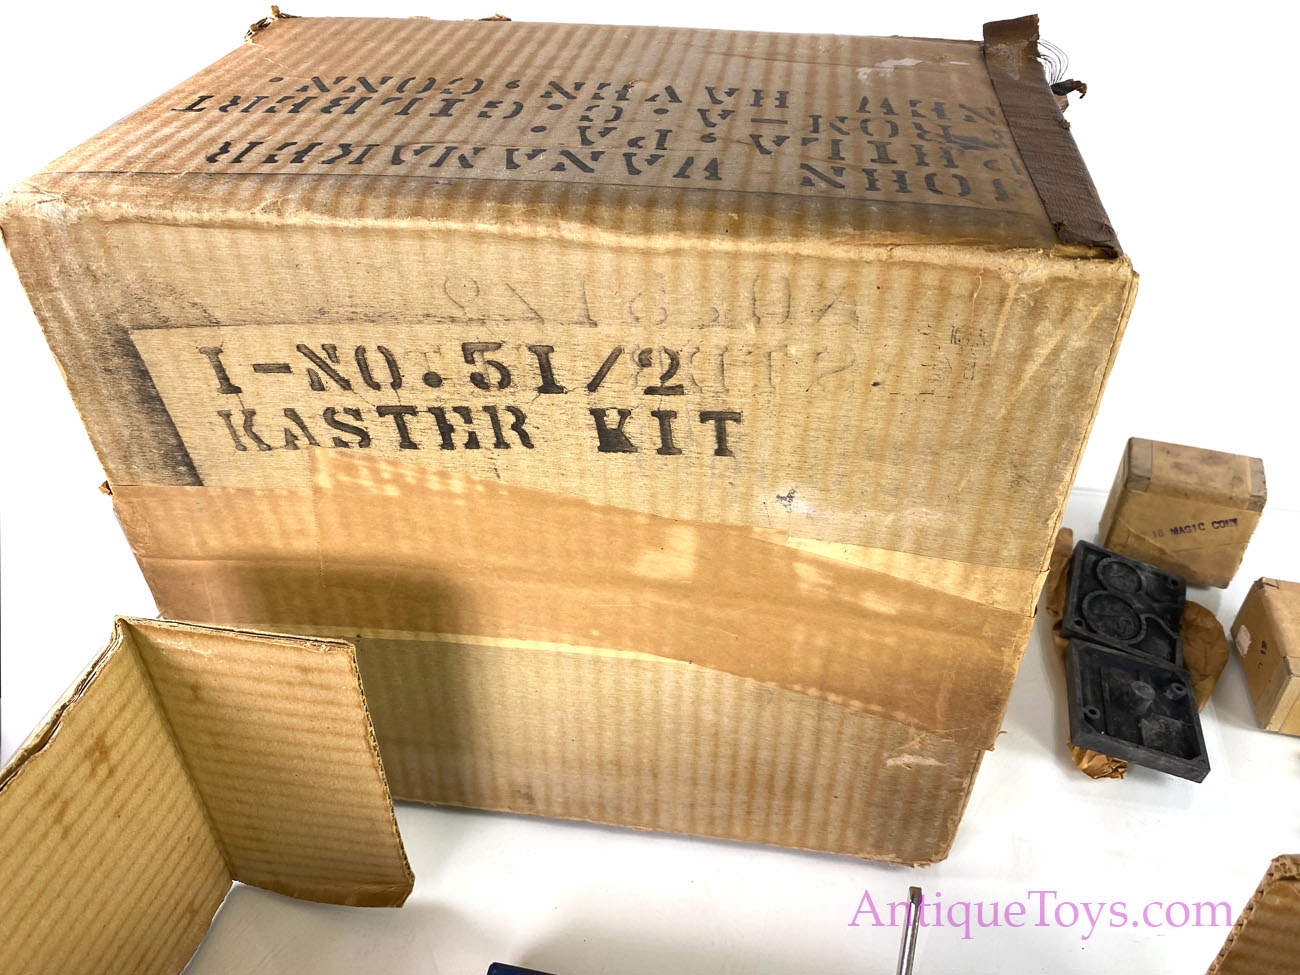 AC Gilbert Lead Toy Casting Kit Kaster Kit for Sale *SOLD* -   - Antique Toys for Sale